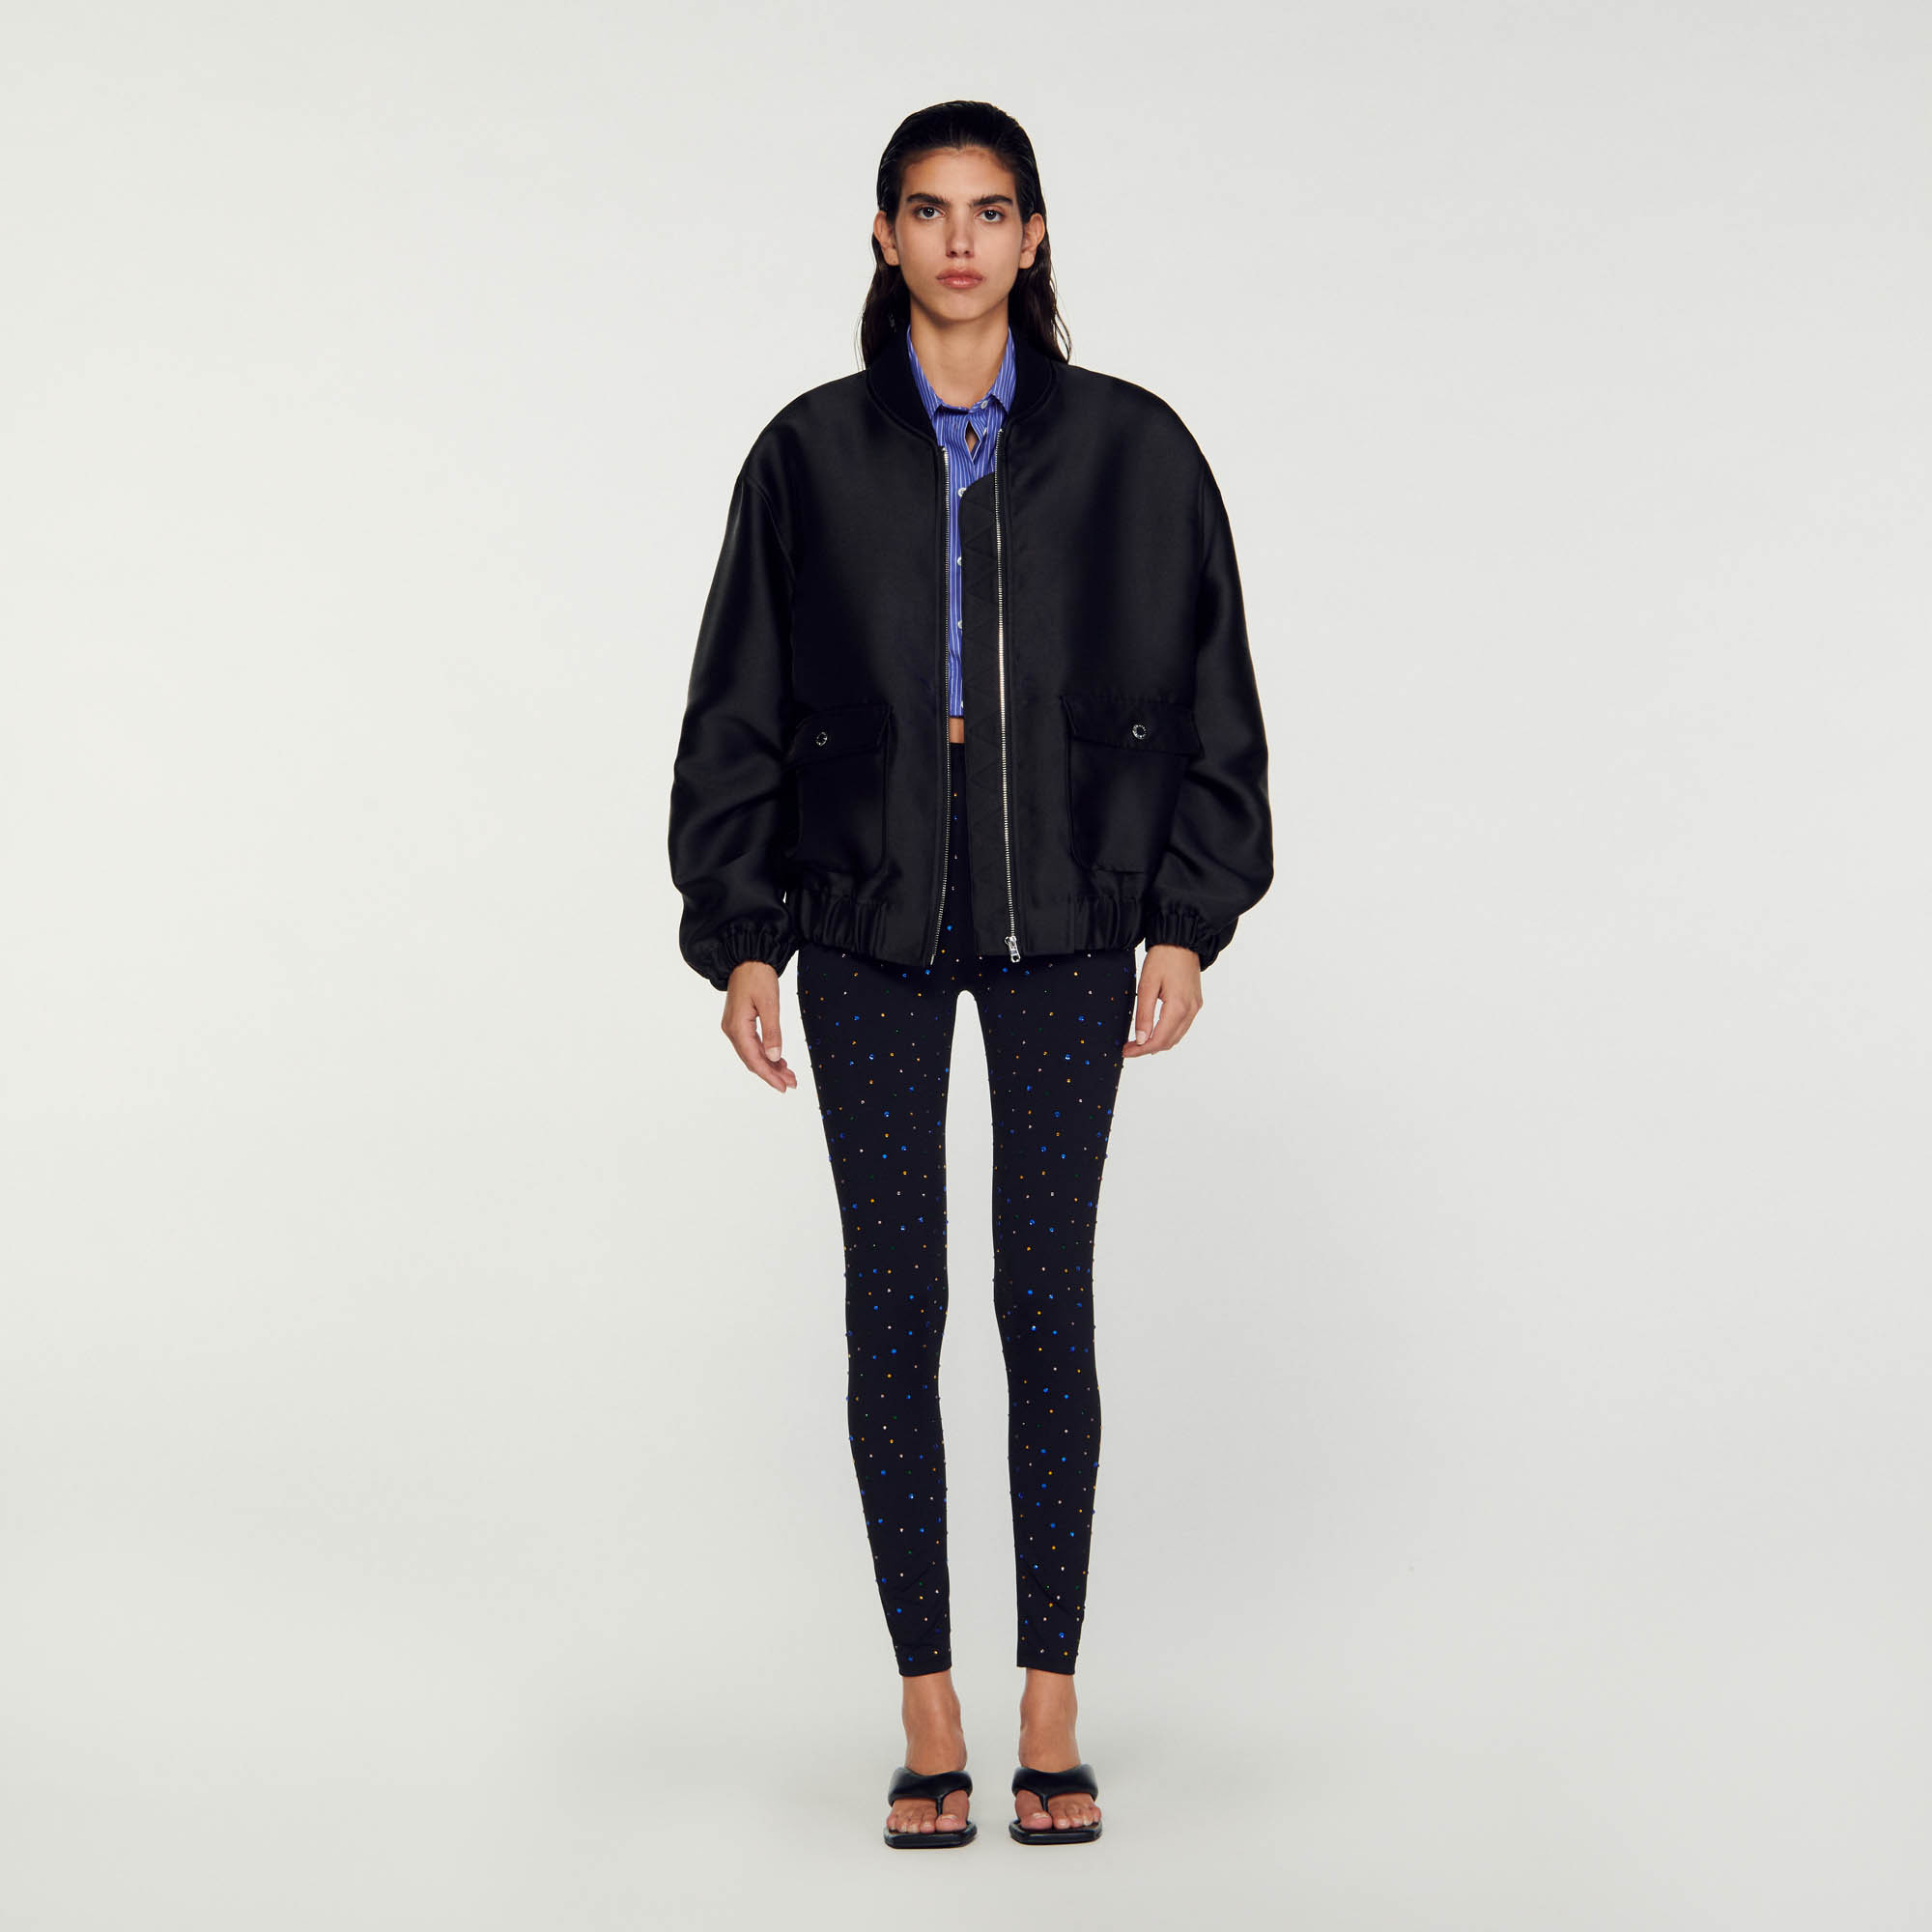 Sandro polyester Lining: Oversized satin-effect bomber jacket with ribbed round collar, long sleeves, zip fastening and flap pockets